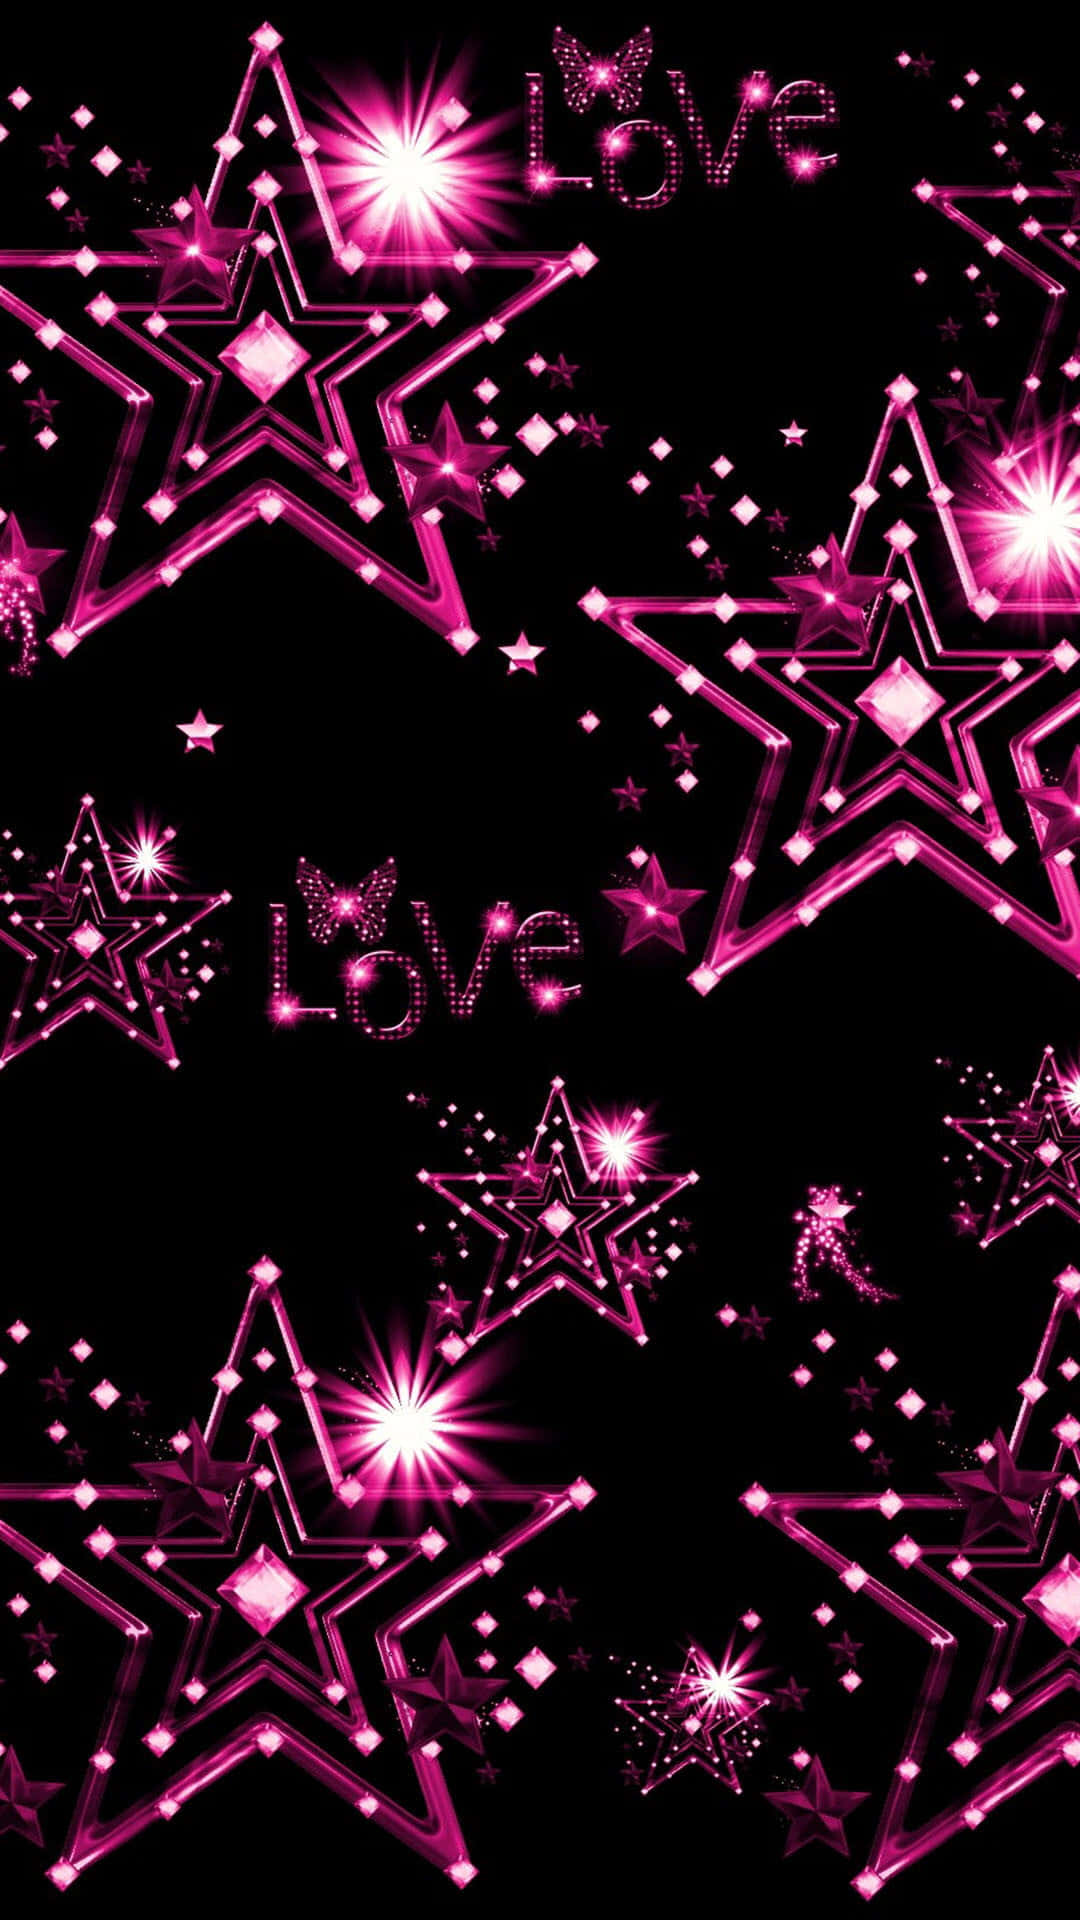 Sparkling Stars In Black And Pink iPhone Wallpaper